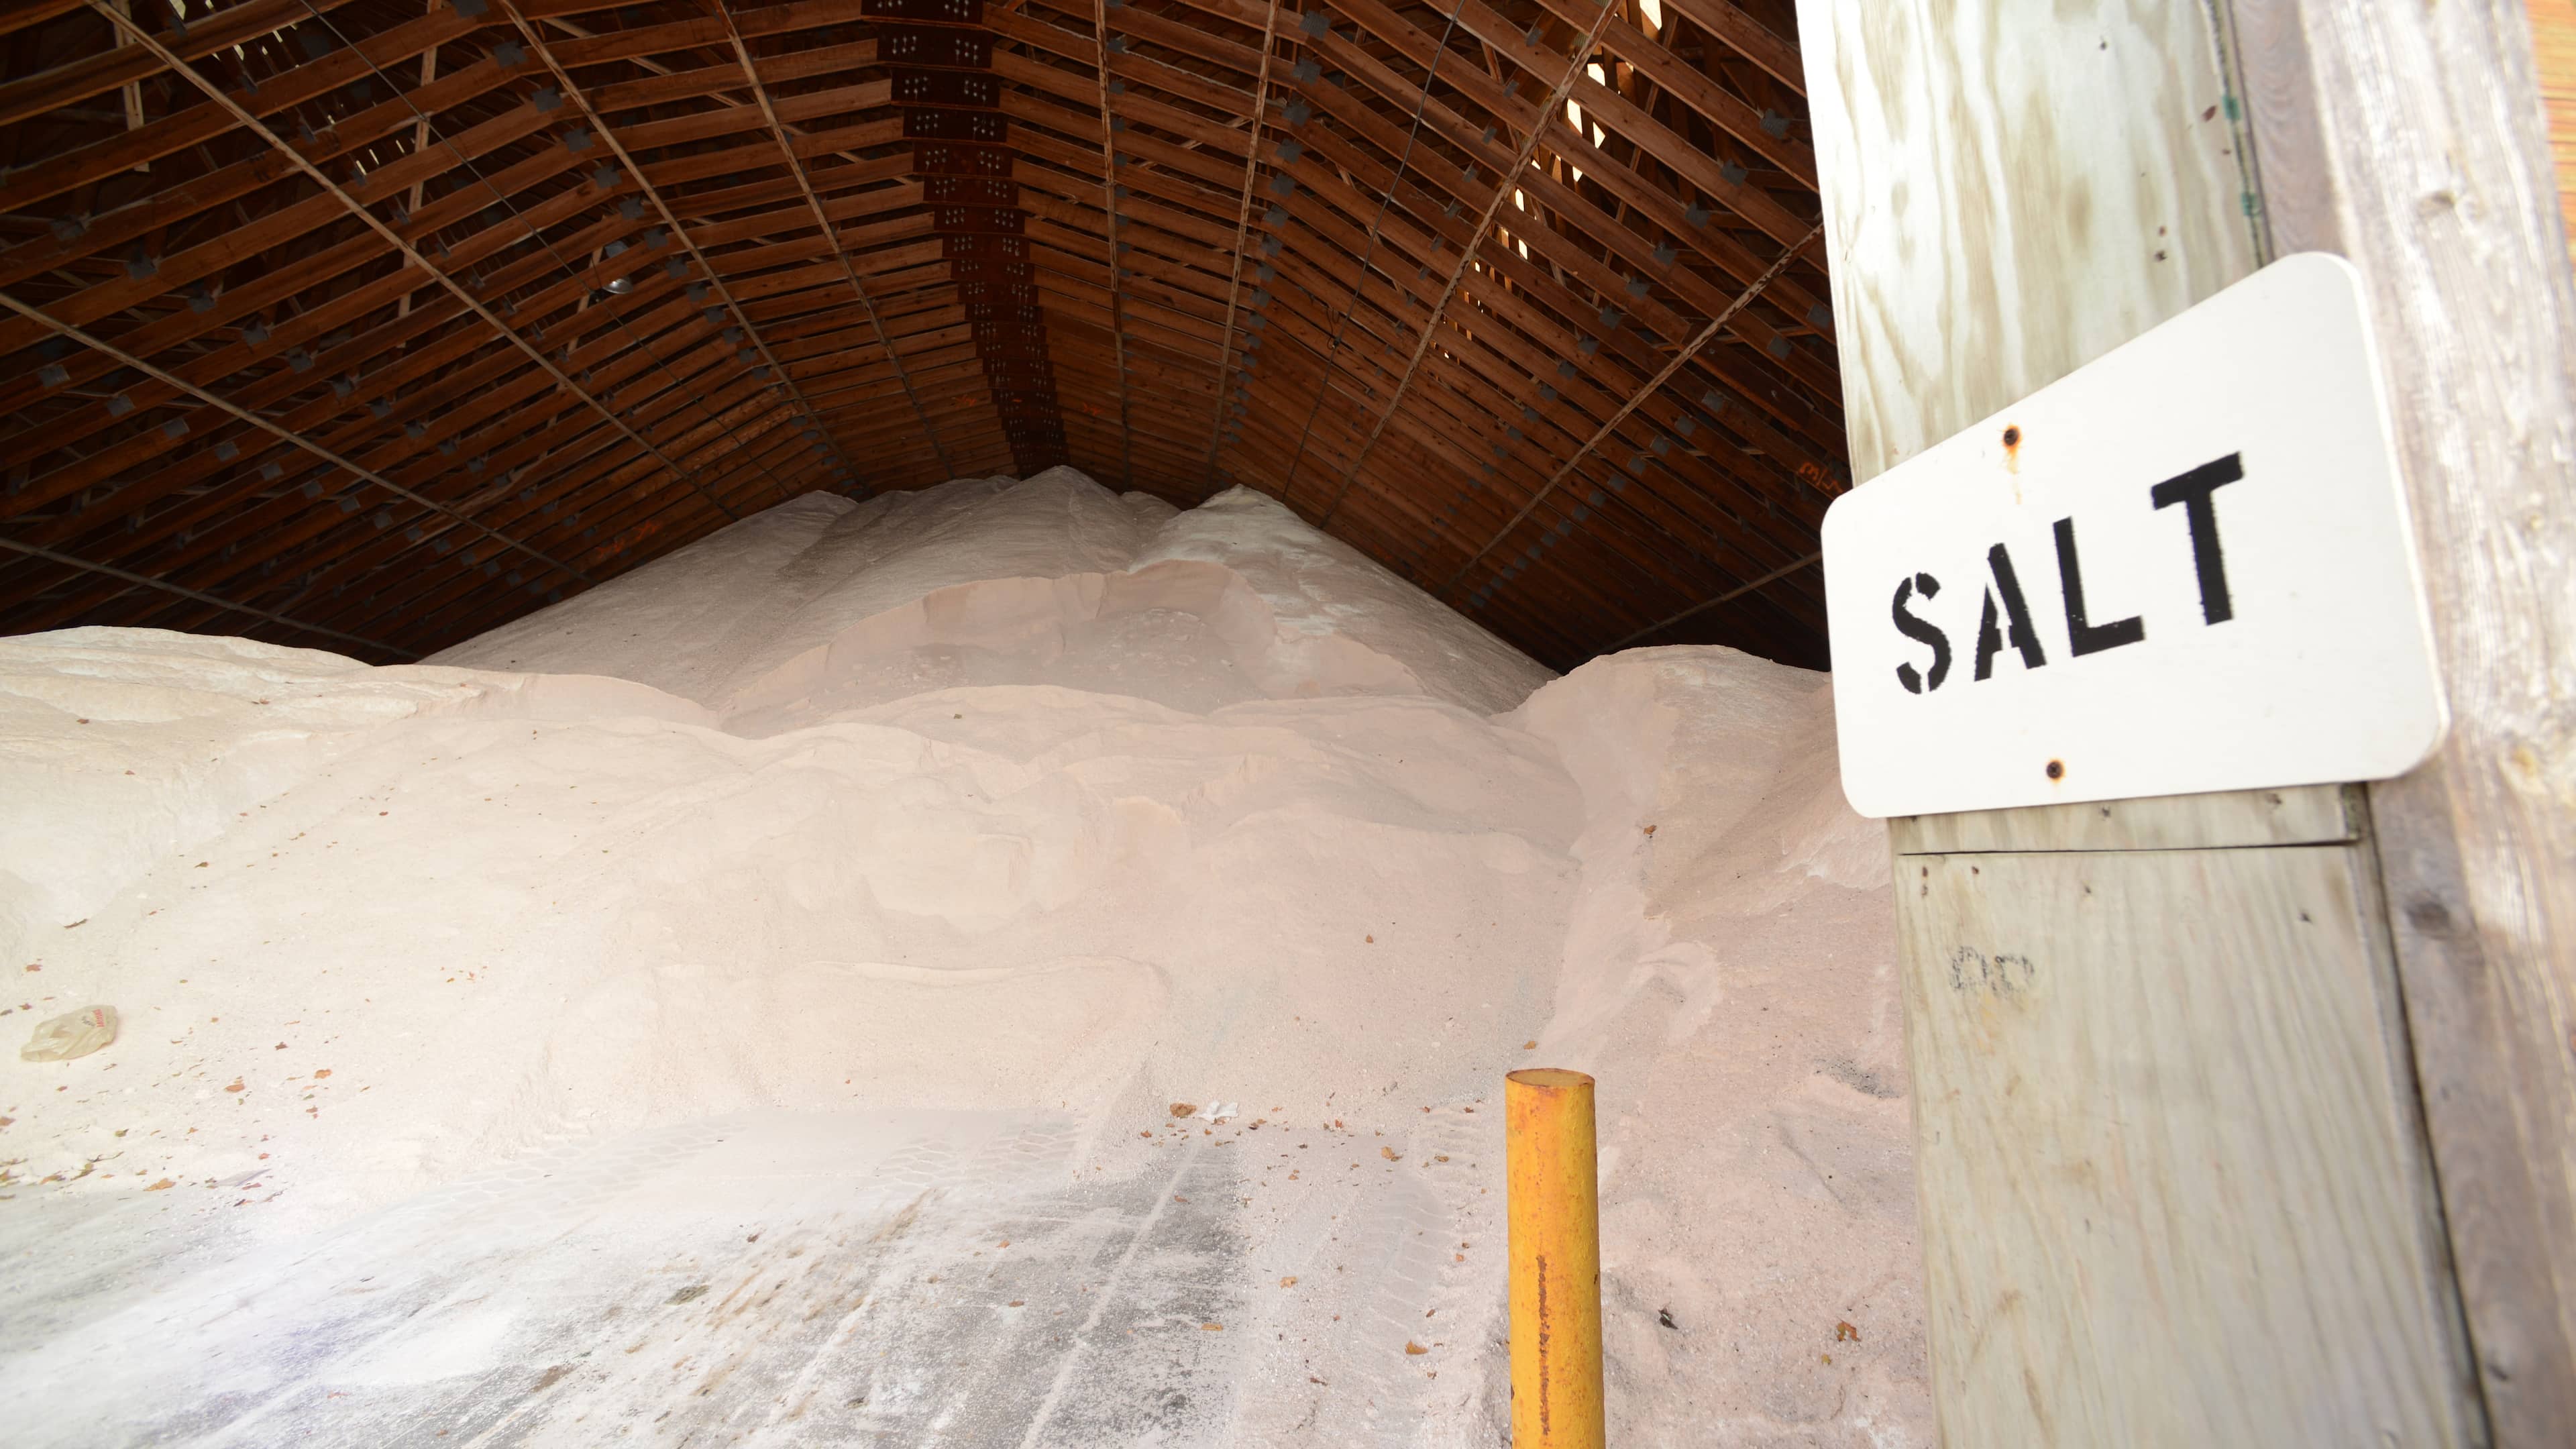 A large pile of salt stored in Pennsylvania.